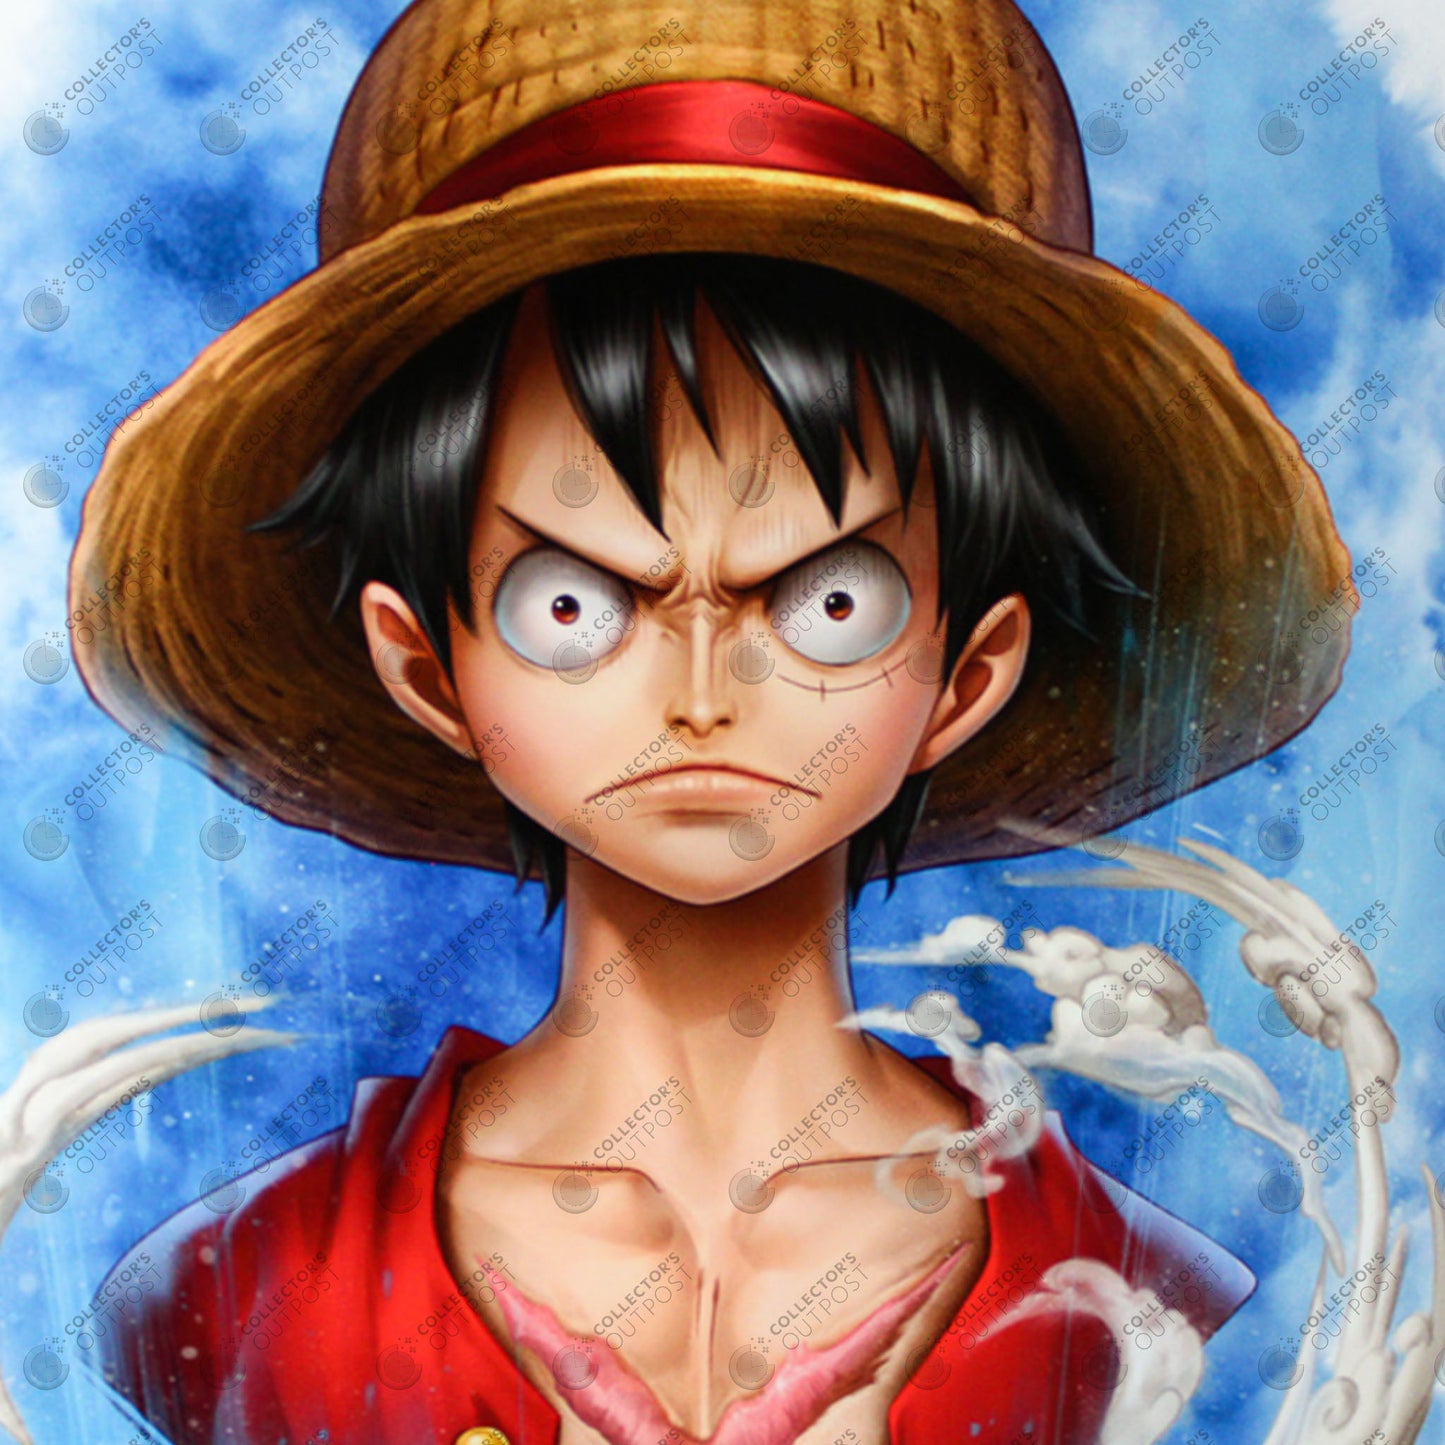 Monkey D. Luffy "I Will Be The Pirate King" One Piece Legacy Art Print